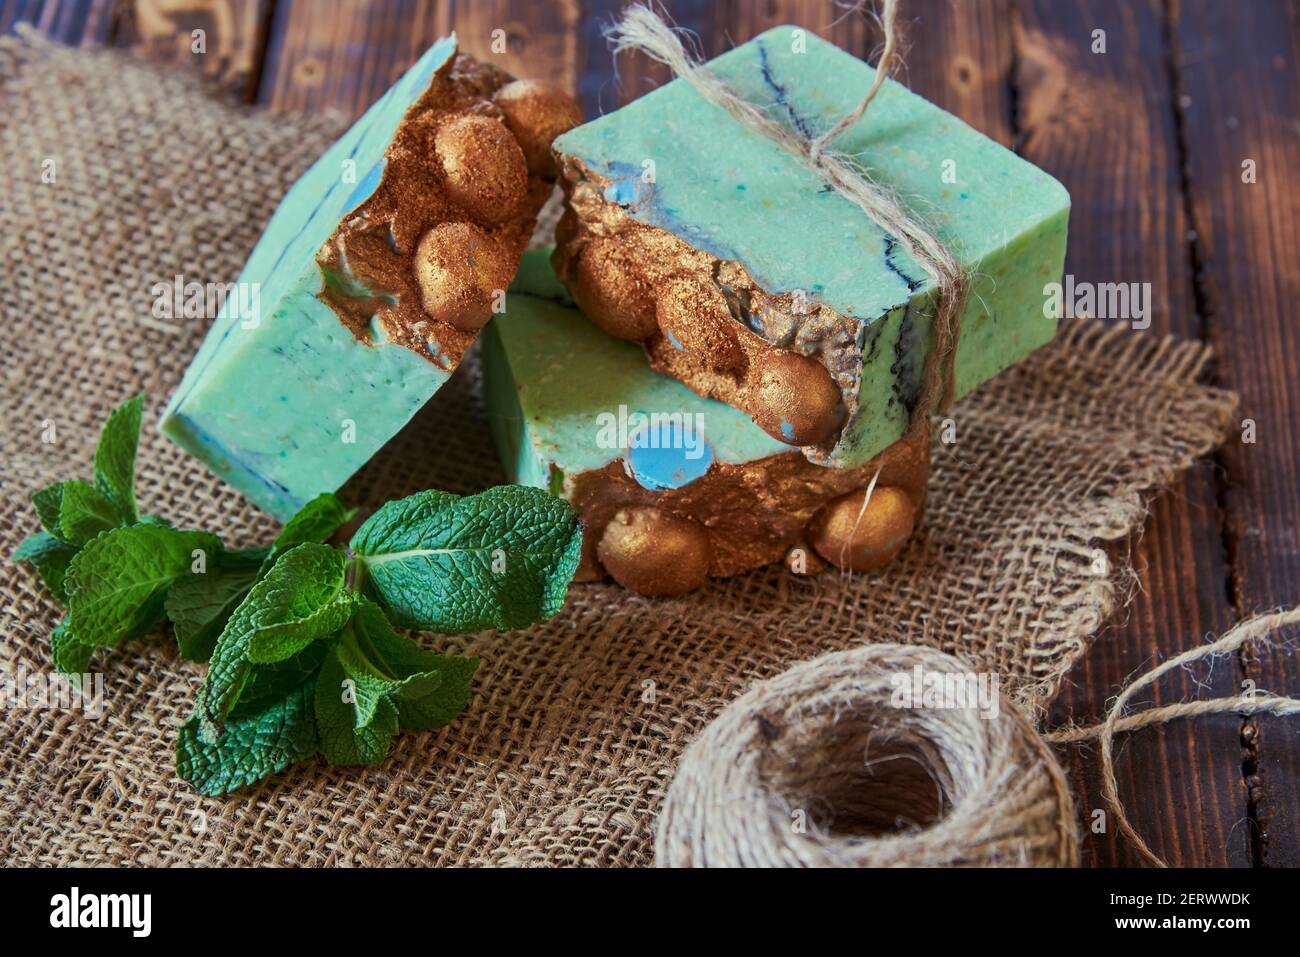 A fragrant green organic handmade soap decorated with mint leaves, burlap and coarse threads on a brown wooden countertop. Stock Photo